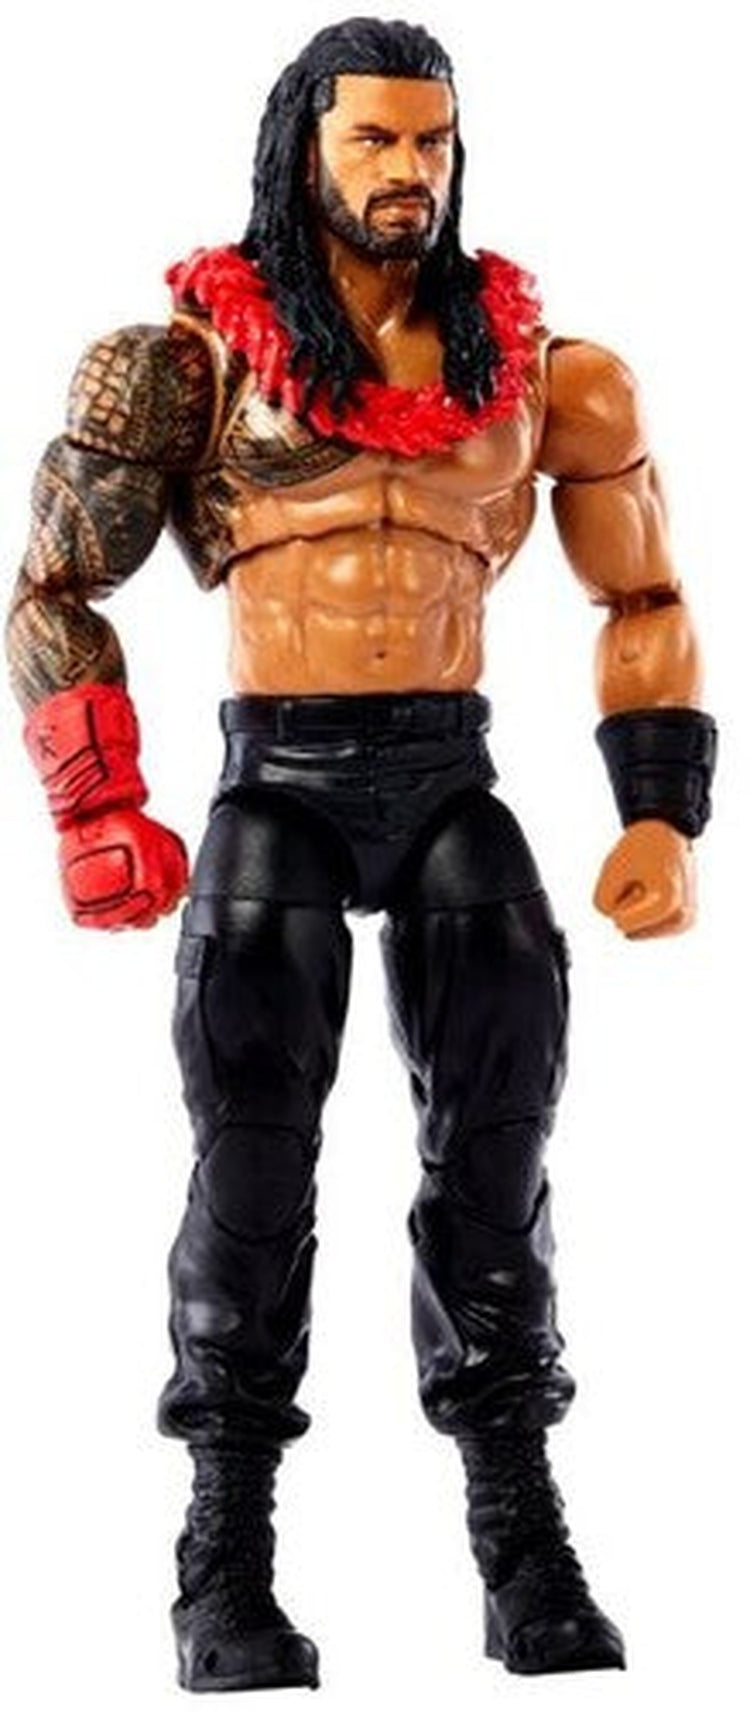 Mattel Collectible - WWE Ultimate Edition Roman Reigns